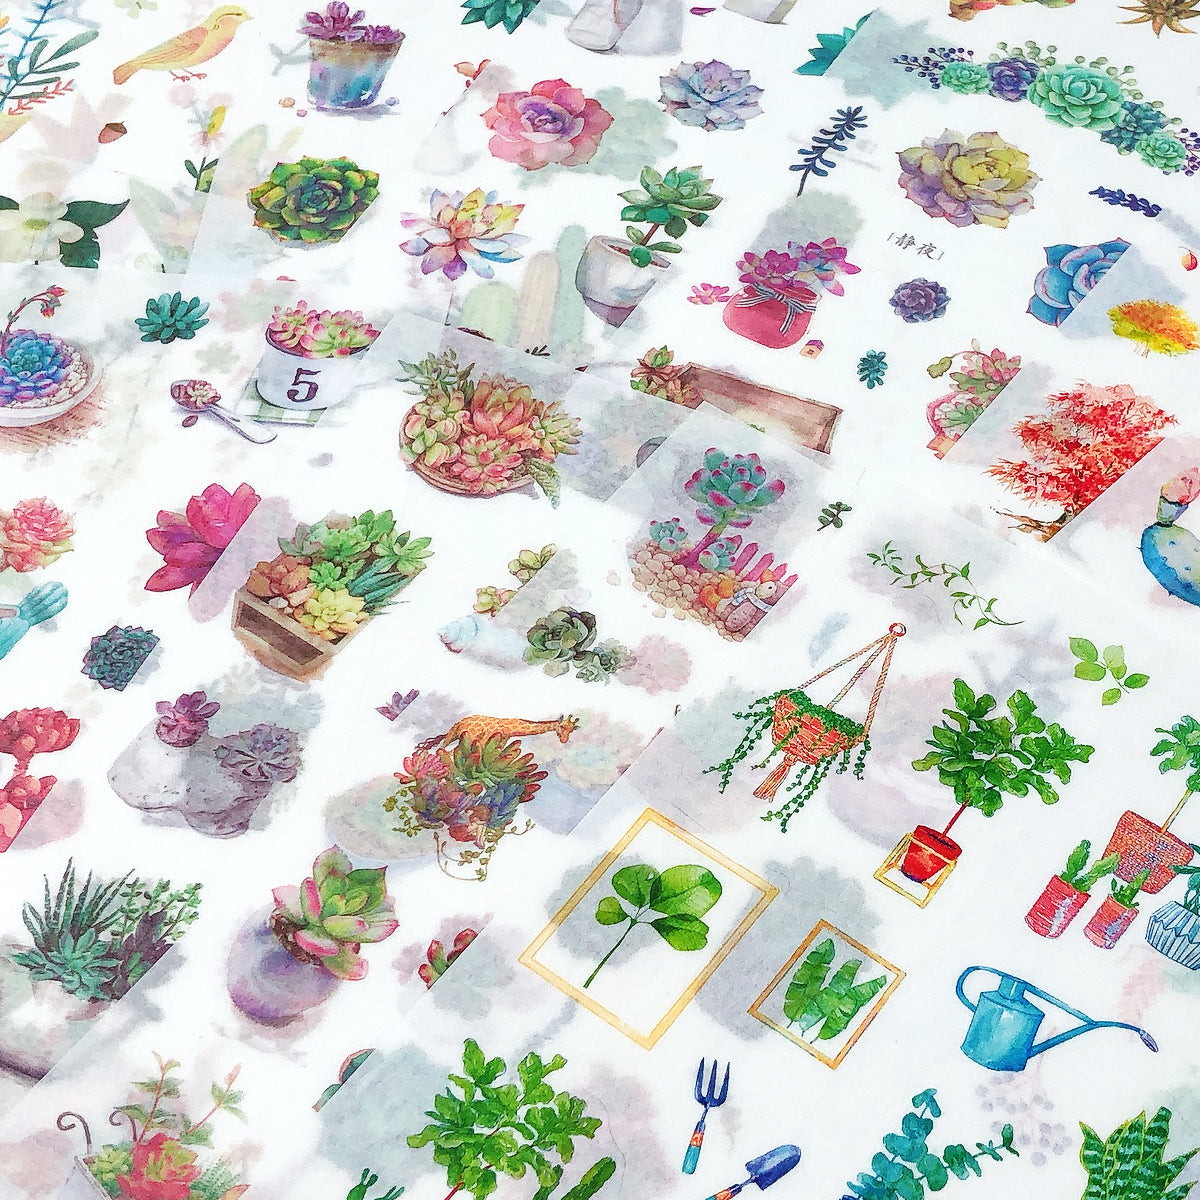 Wrapables Washi Stickers Sets for Scrapbooking, DIY Crafts for Stationery, Diary, Card Making